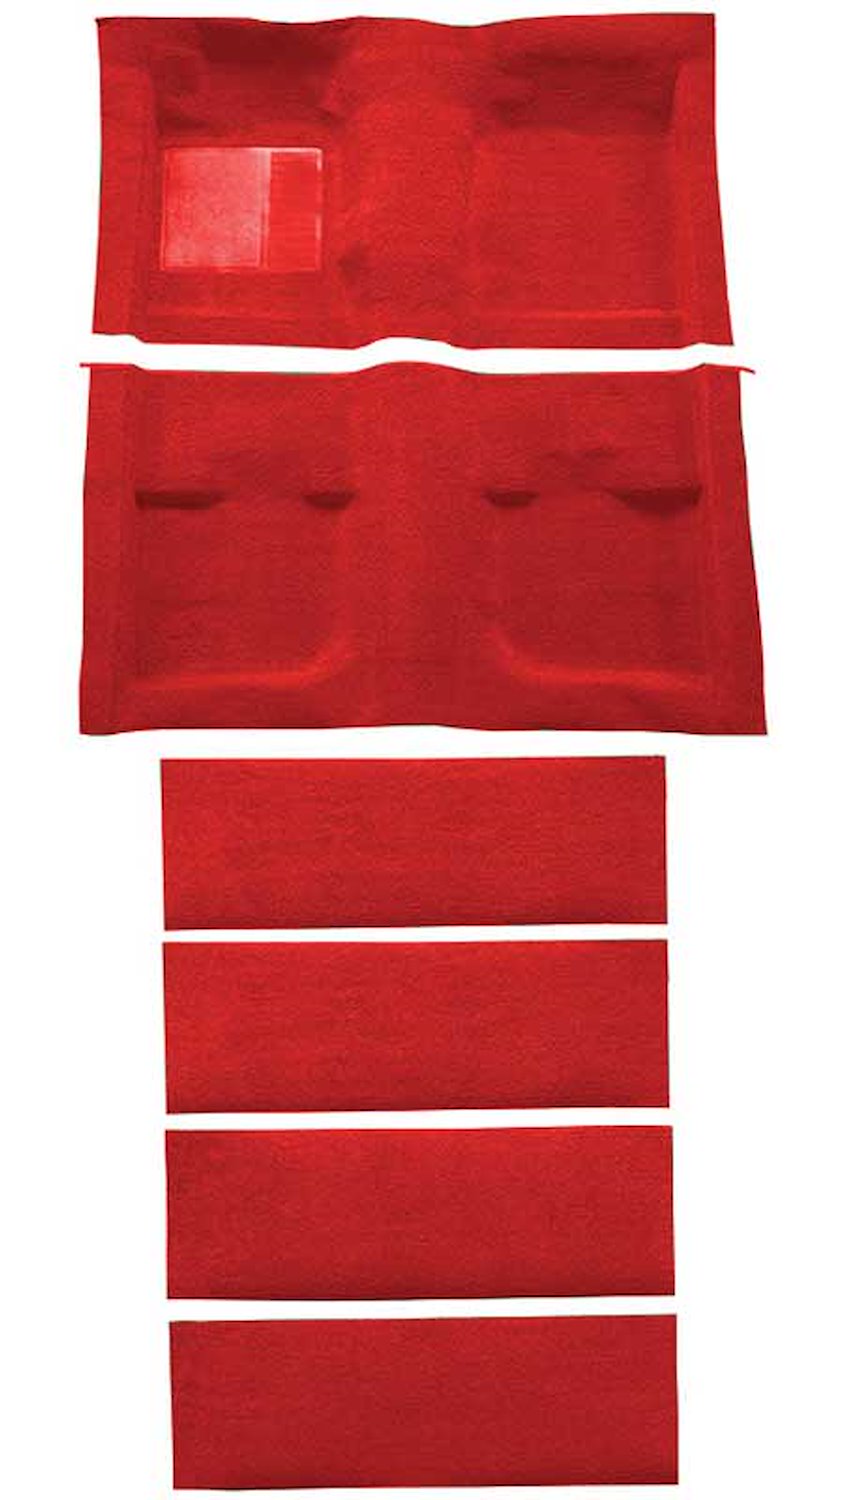 A4061A92 Nylon Loop Floor and Fold Down Seat Carpet Set 1971-73 Mustang Fastback; Medium Red